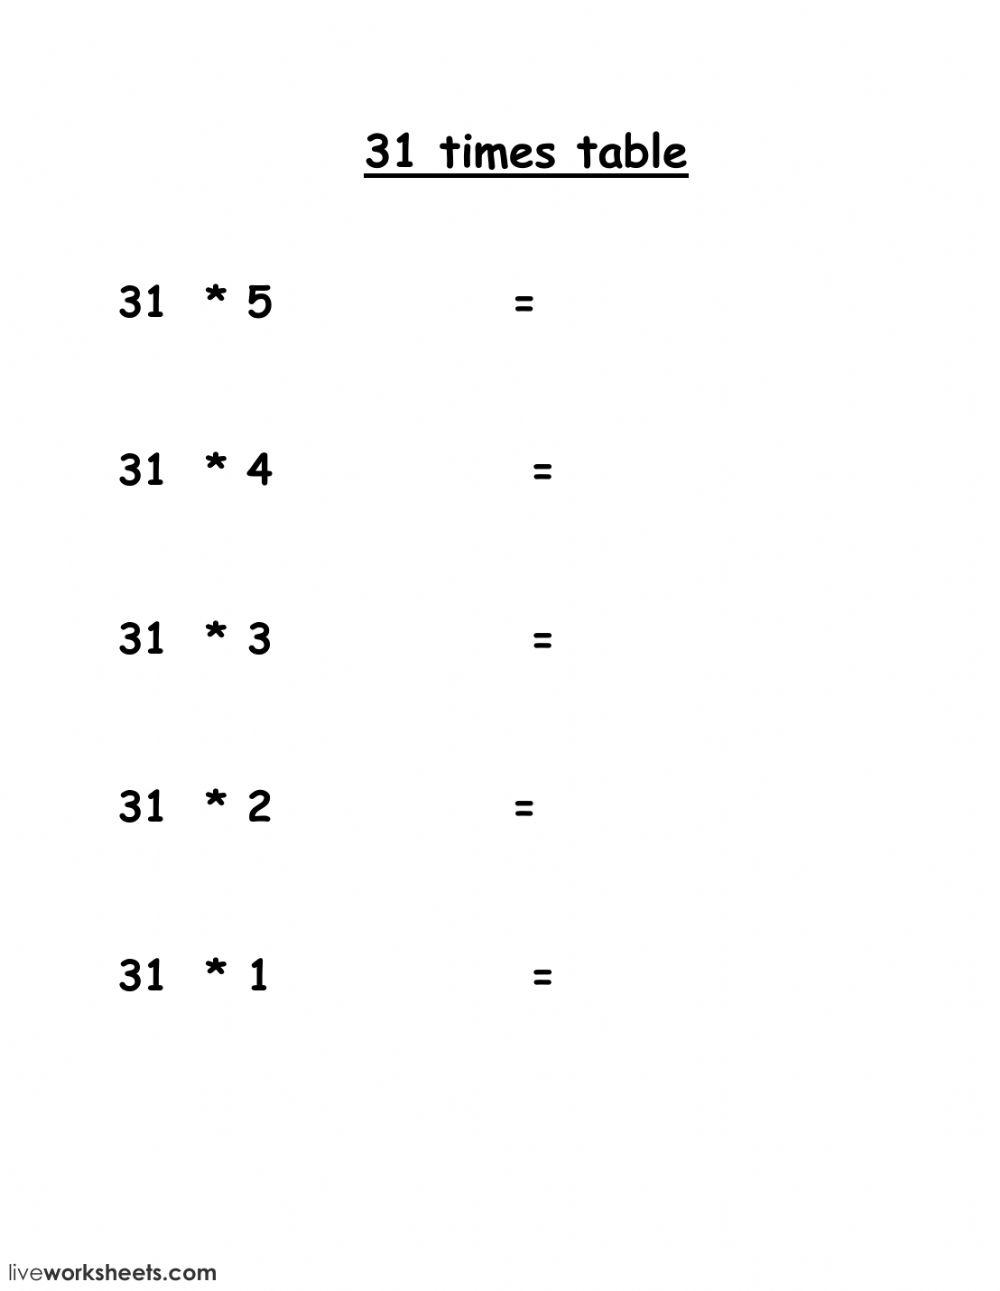 31 times table